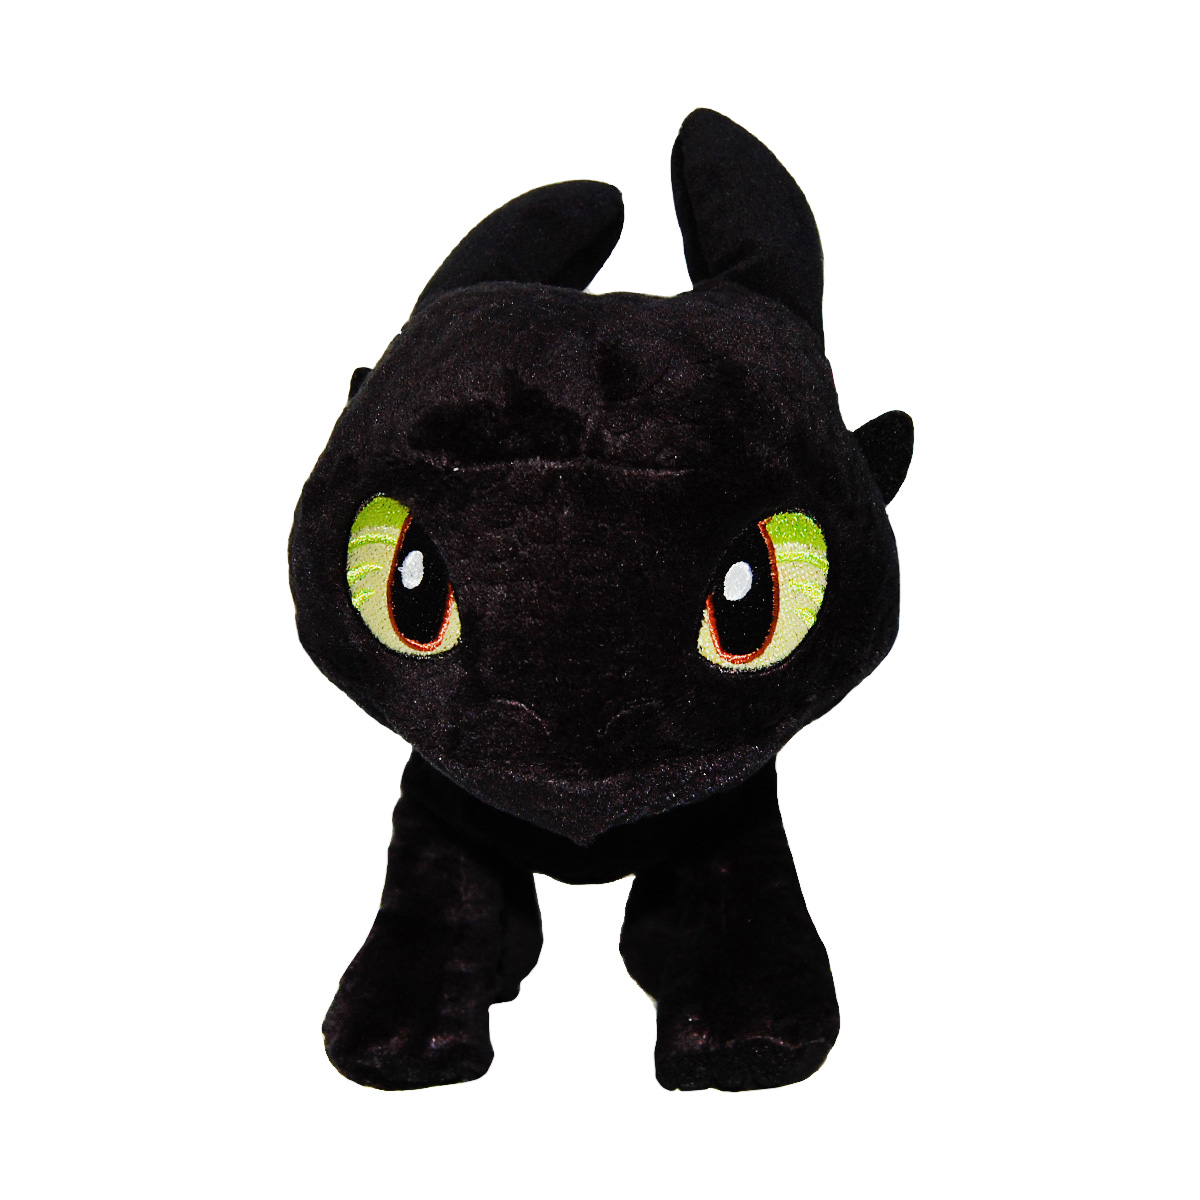 Jucarie din plus Toothless, Soft Dragons, Play by Play, 30 cm din imagine noua responsabilitatesociala.ro